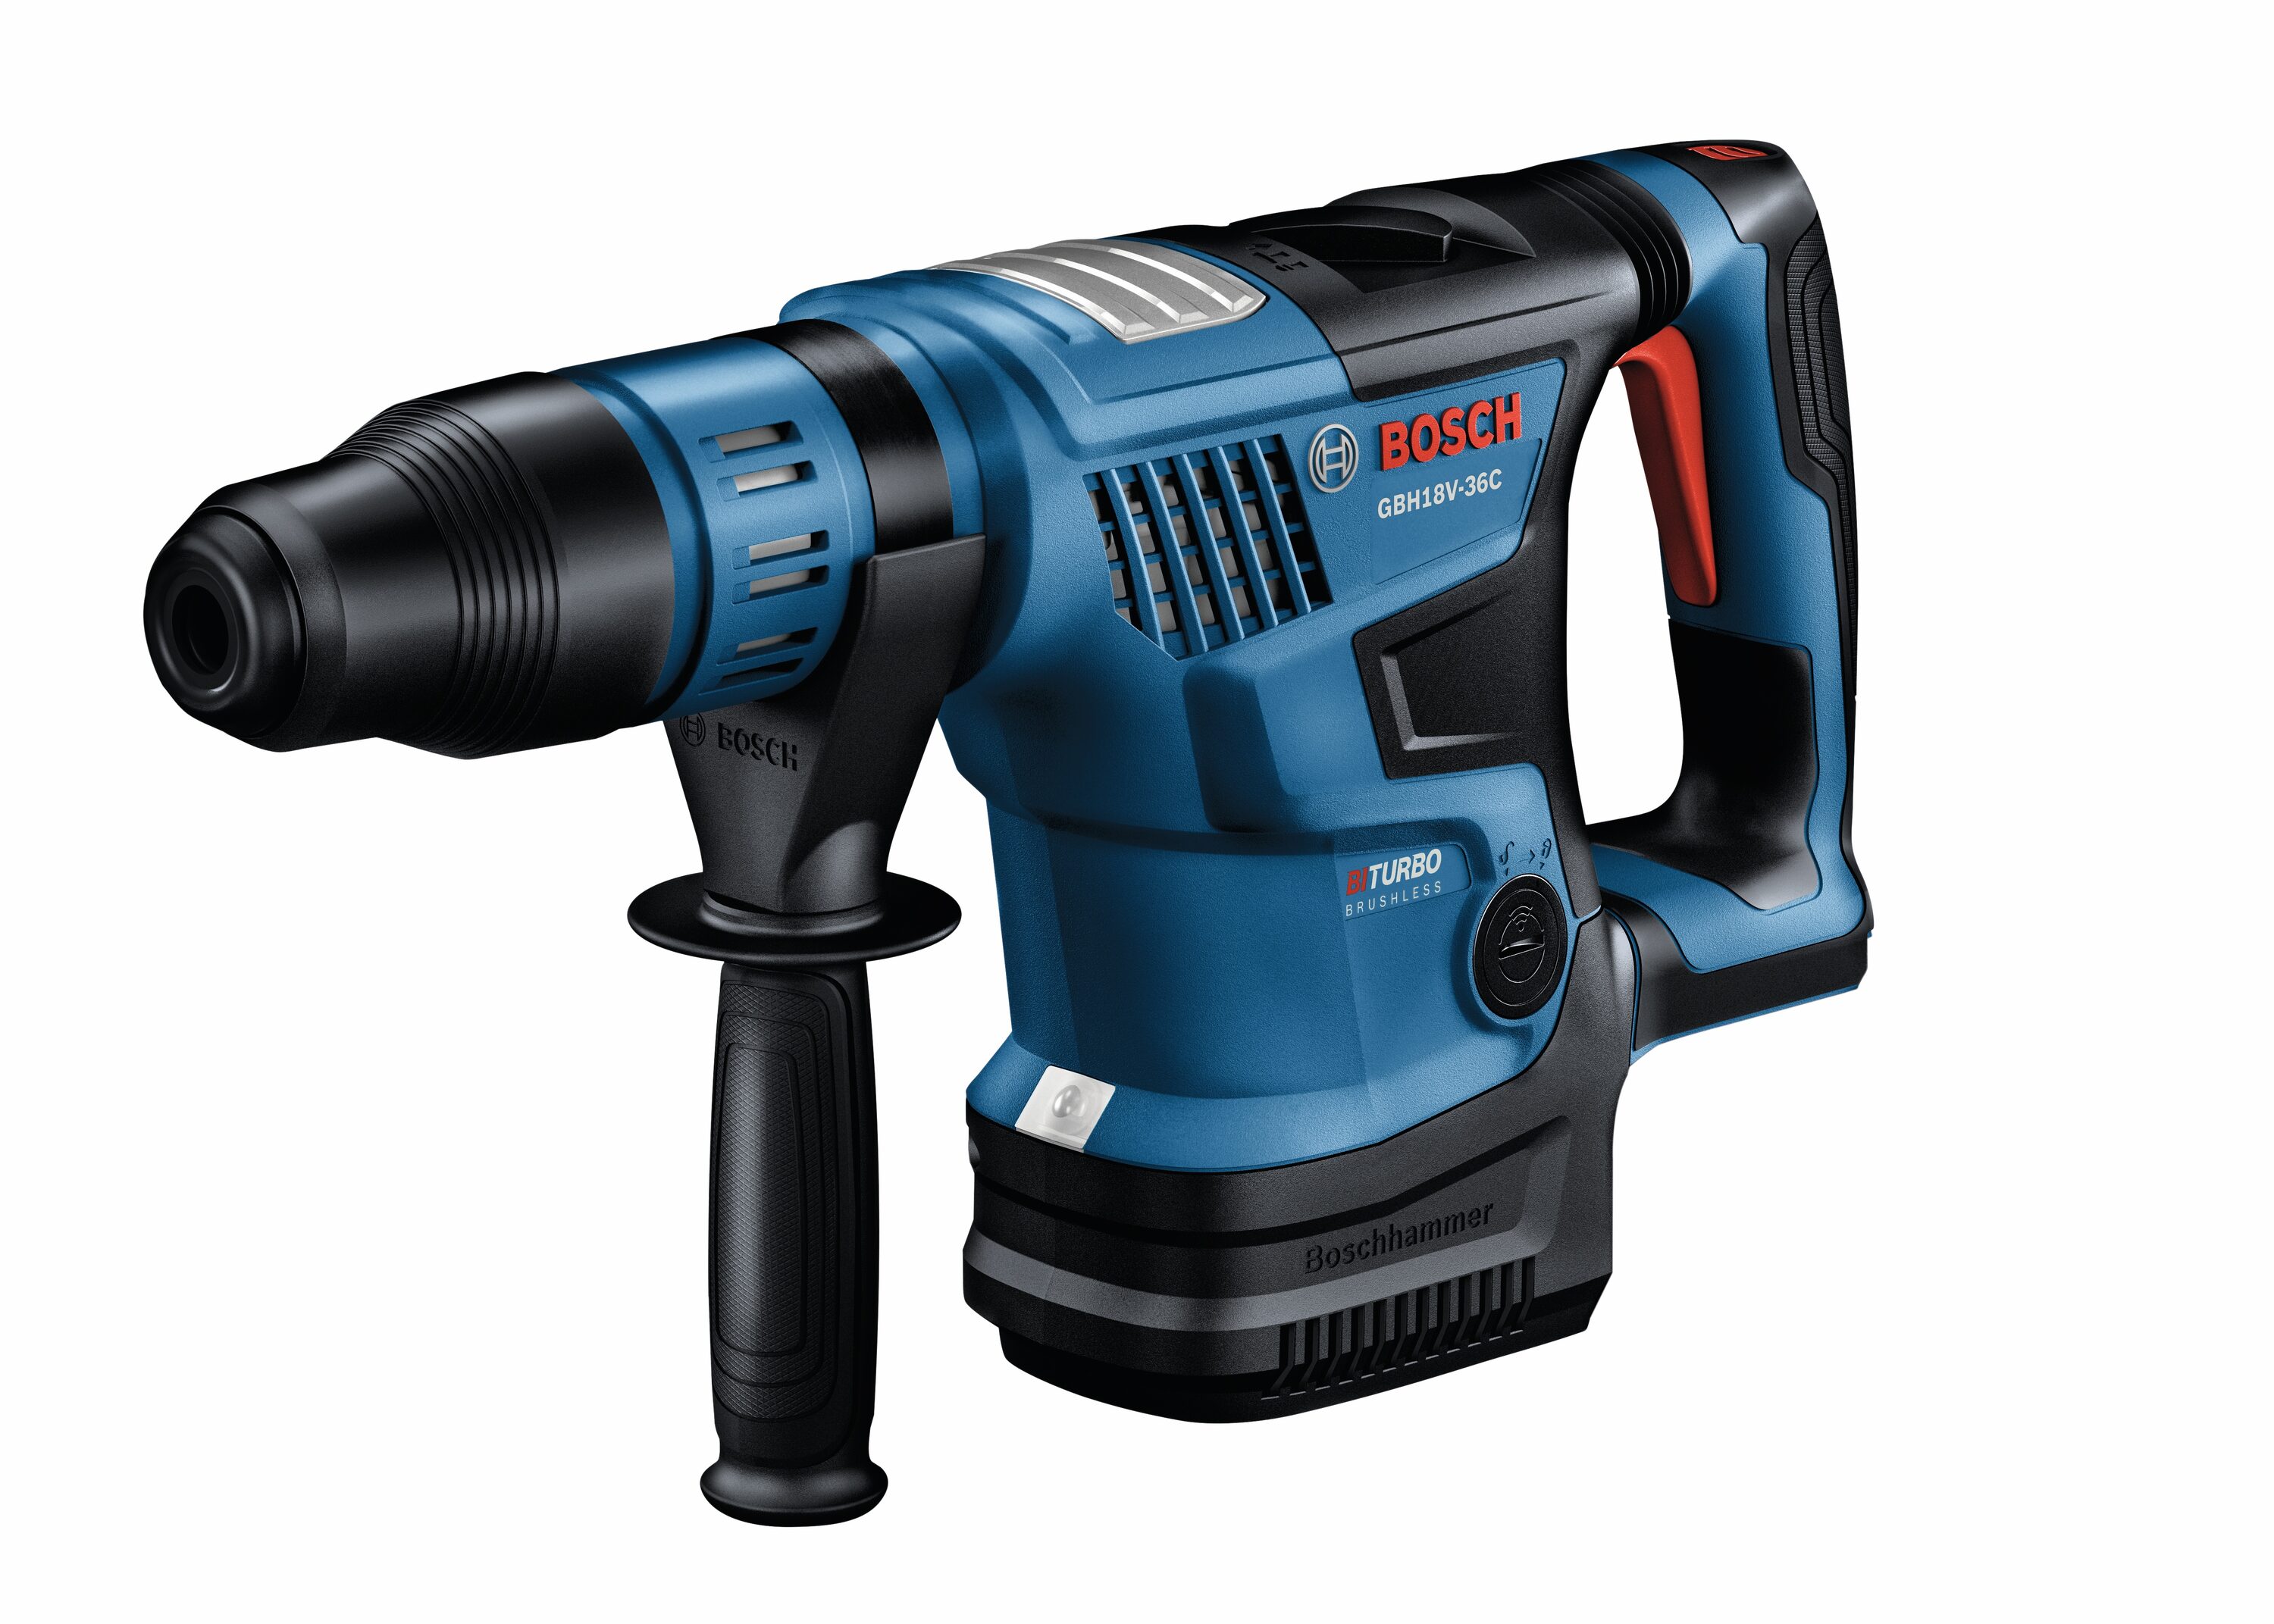 Rotary Sds-max Rotary 8-Amp 18-volt PROFACTOR in Drills Hammer Tool) Bosch Speed at Cordless Hammer 1-9/16-in (Bare department the Drill Variable